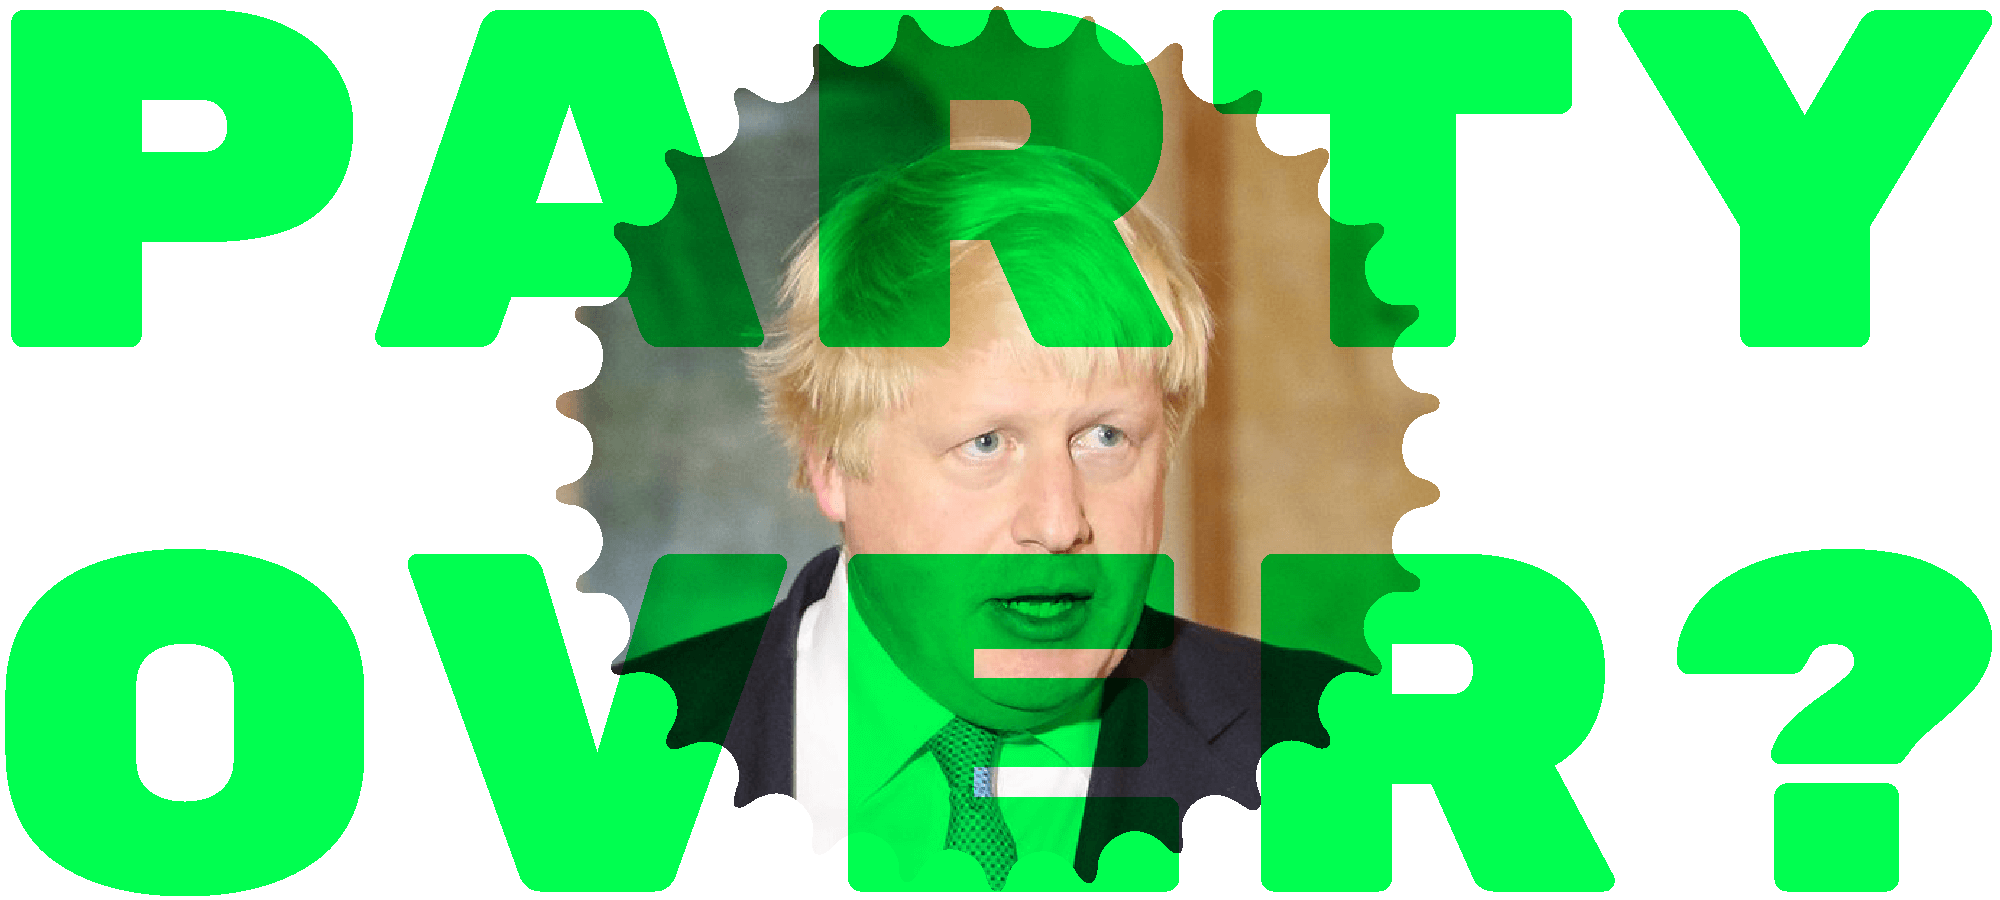 PARTY OVER? header illustration – BoJo with googly eyes